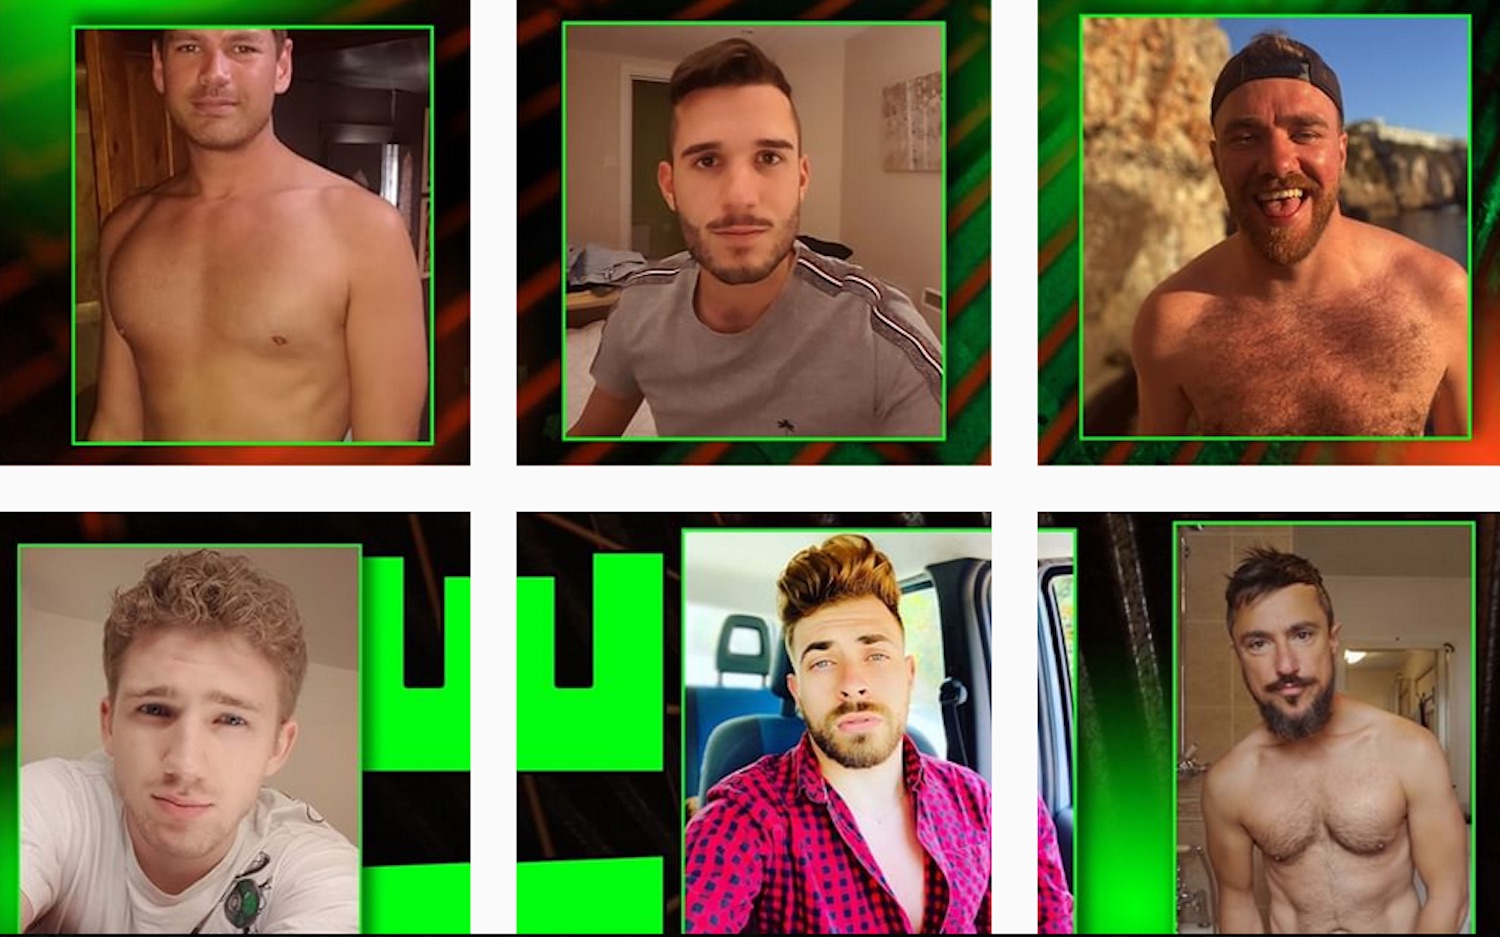 HOT ALERT: Pleasuredrome is showcasing the guys who made it through their casting call